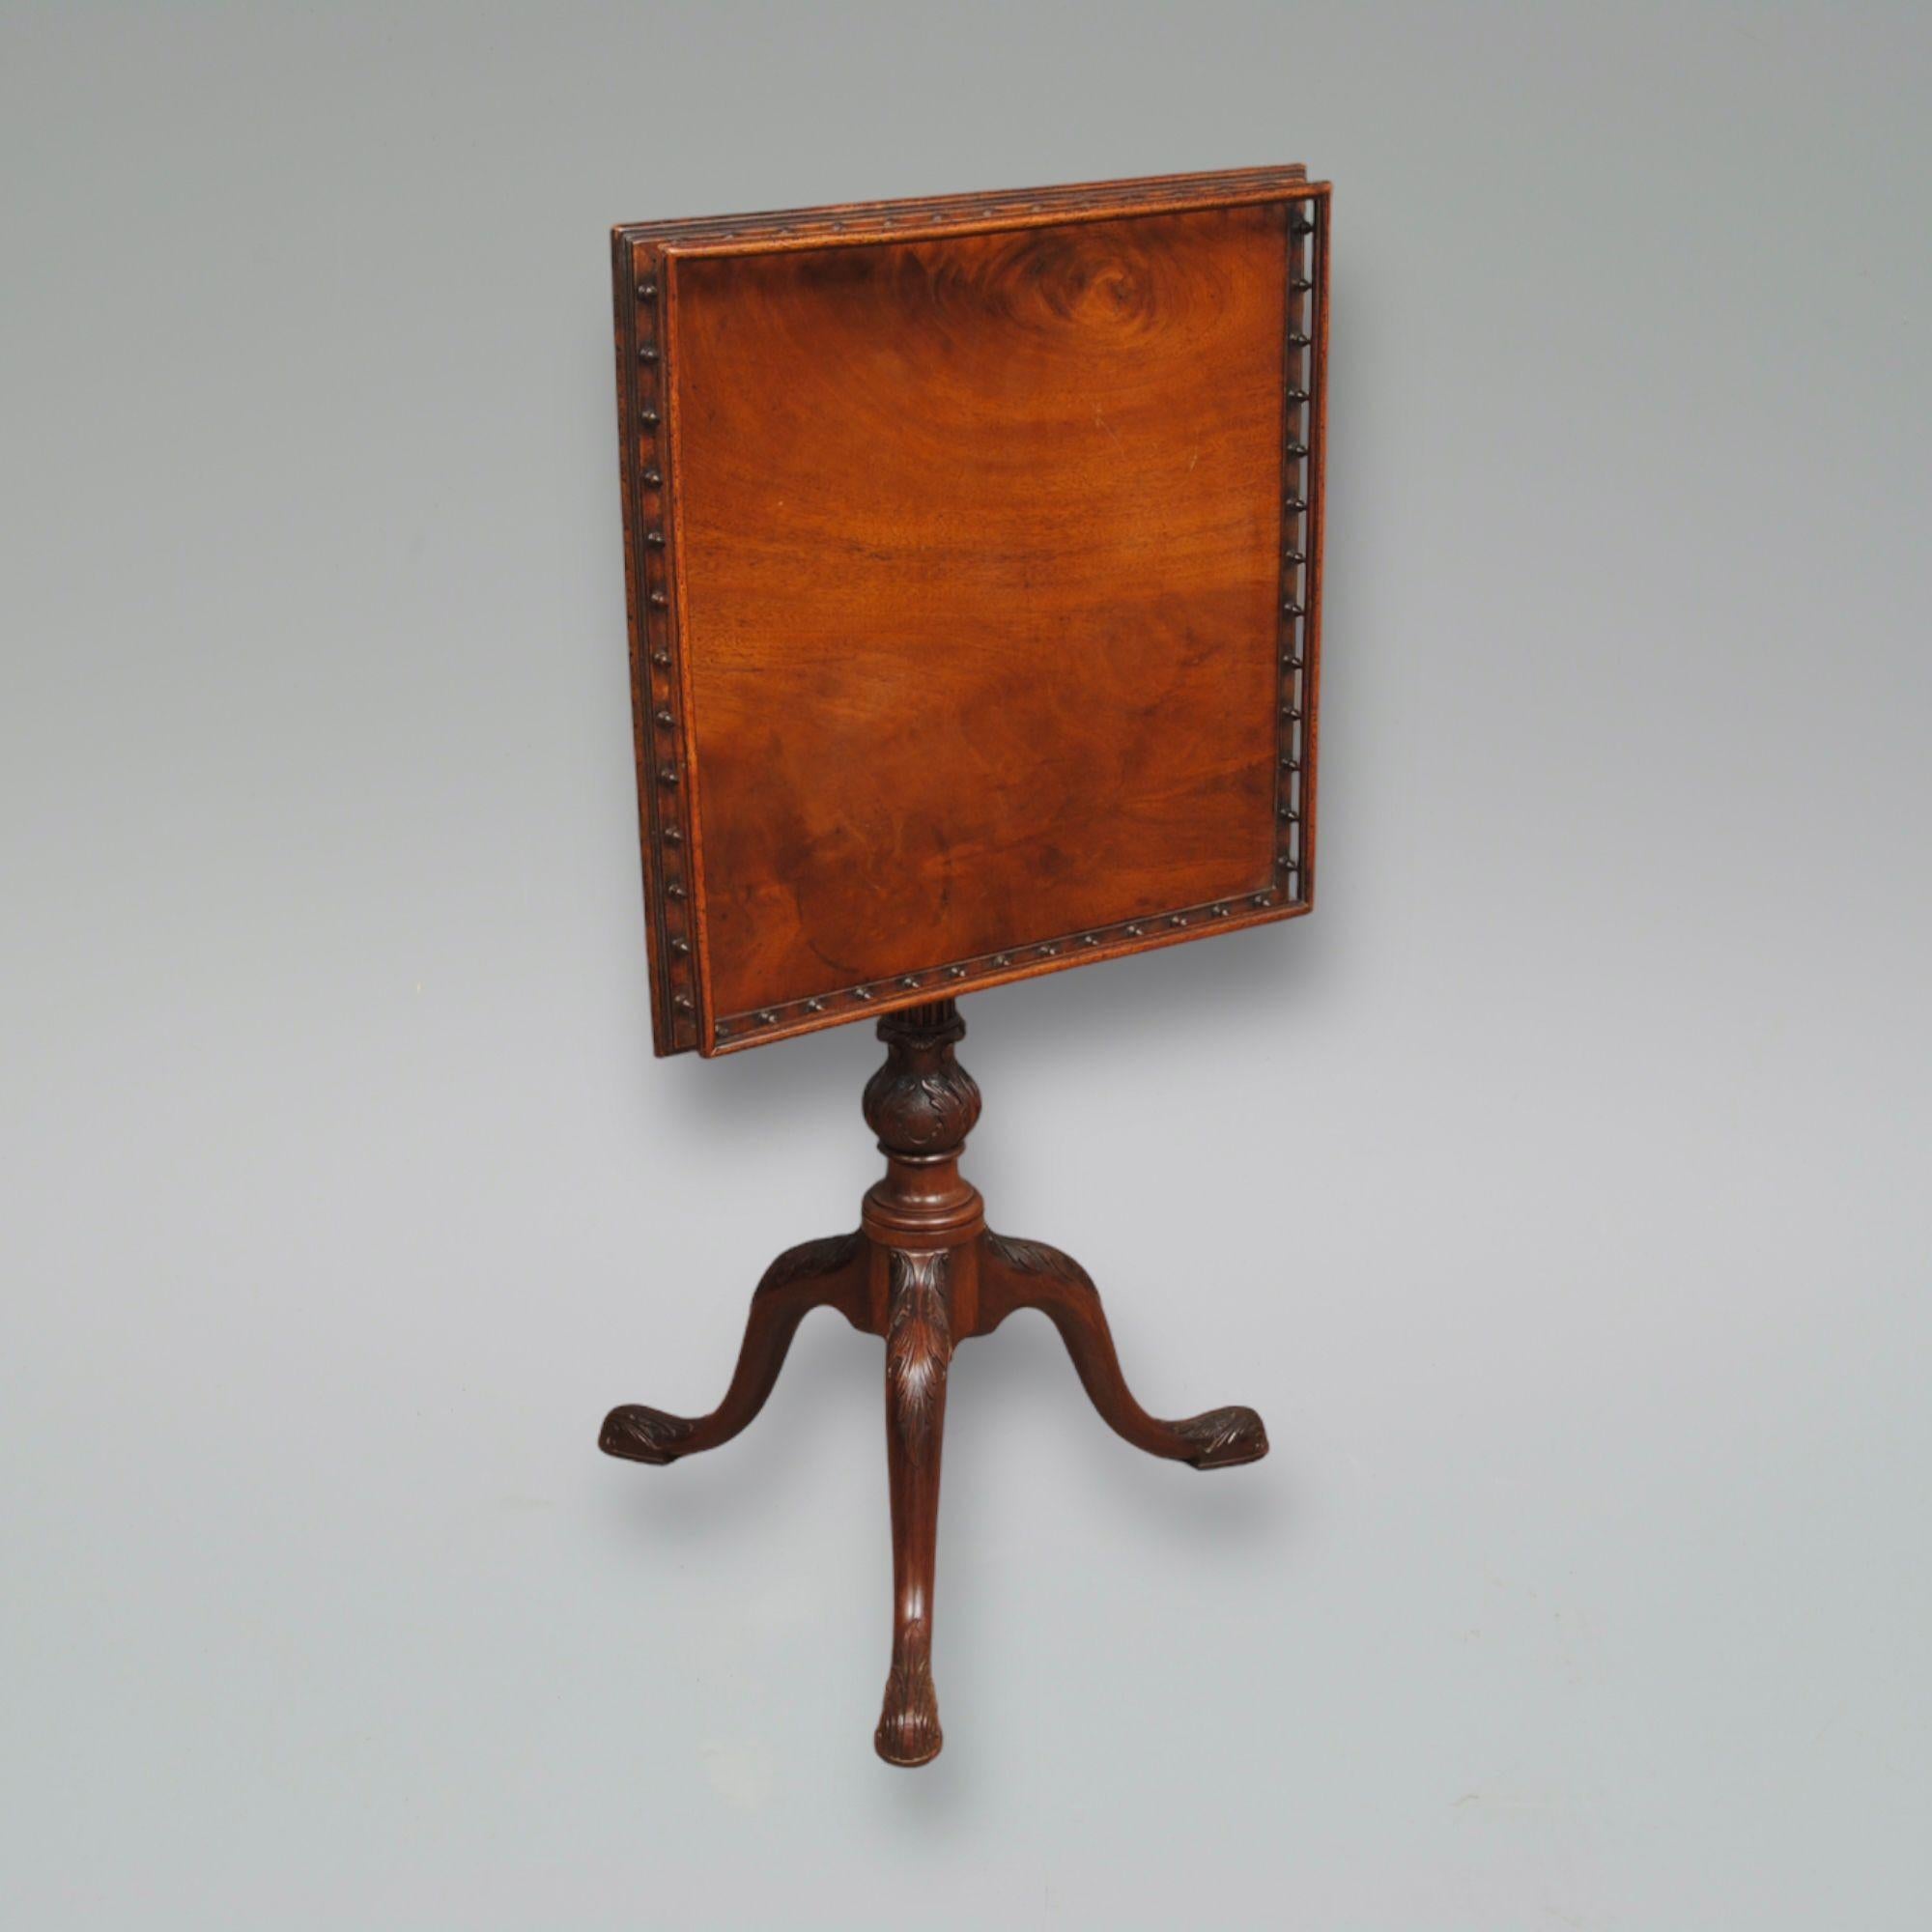 A fine 18th century mahogany triopod table with carved acanthus stem and cabriole legs. The top with an elegant gallery with turned spindles.
Circa 1770